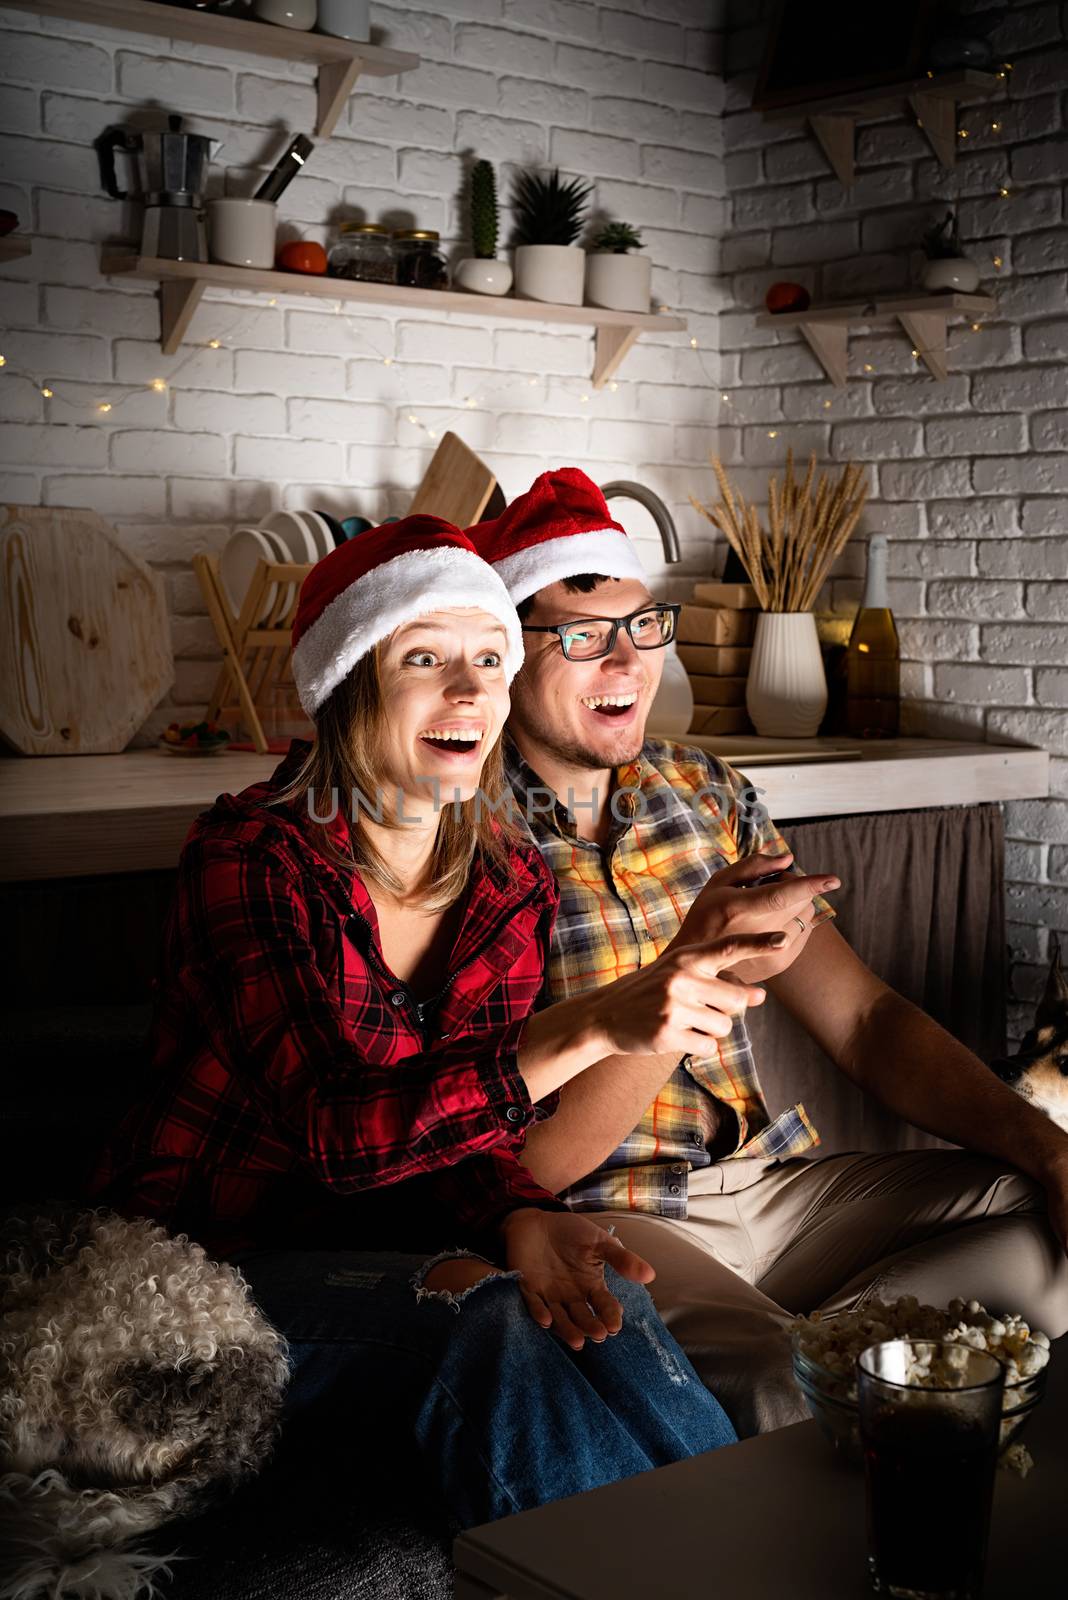 Movie night. Young couple watching movies at home at christmas pointing to the screen eating popcorn